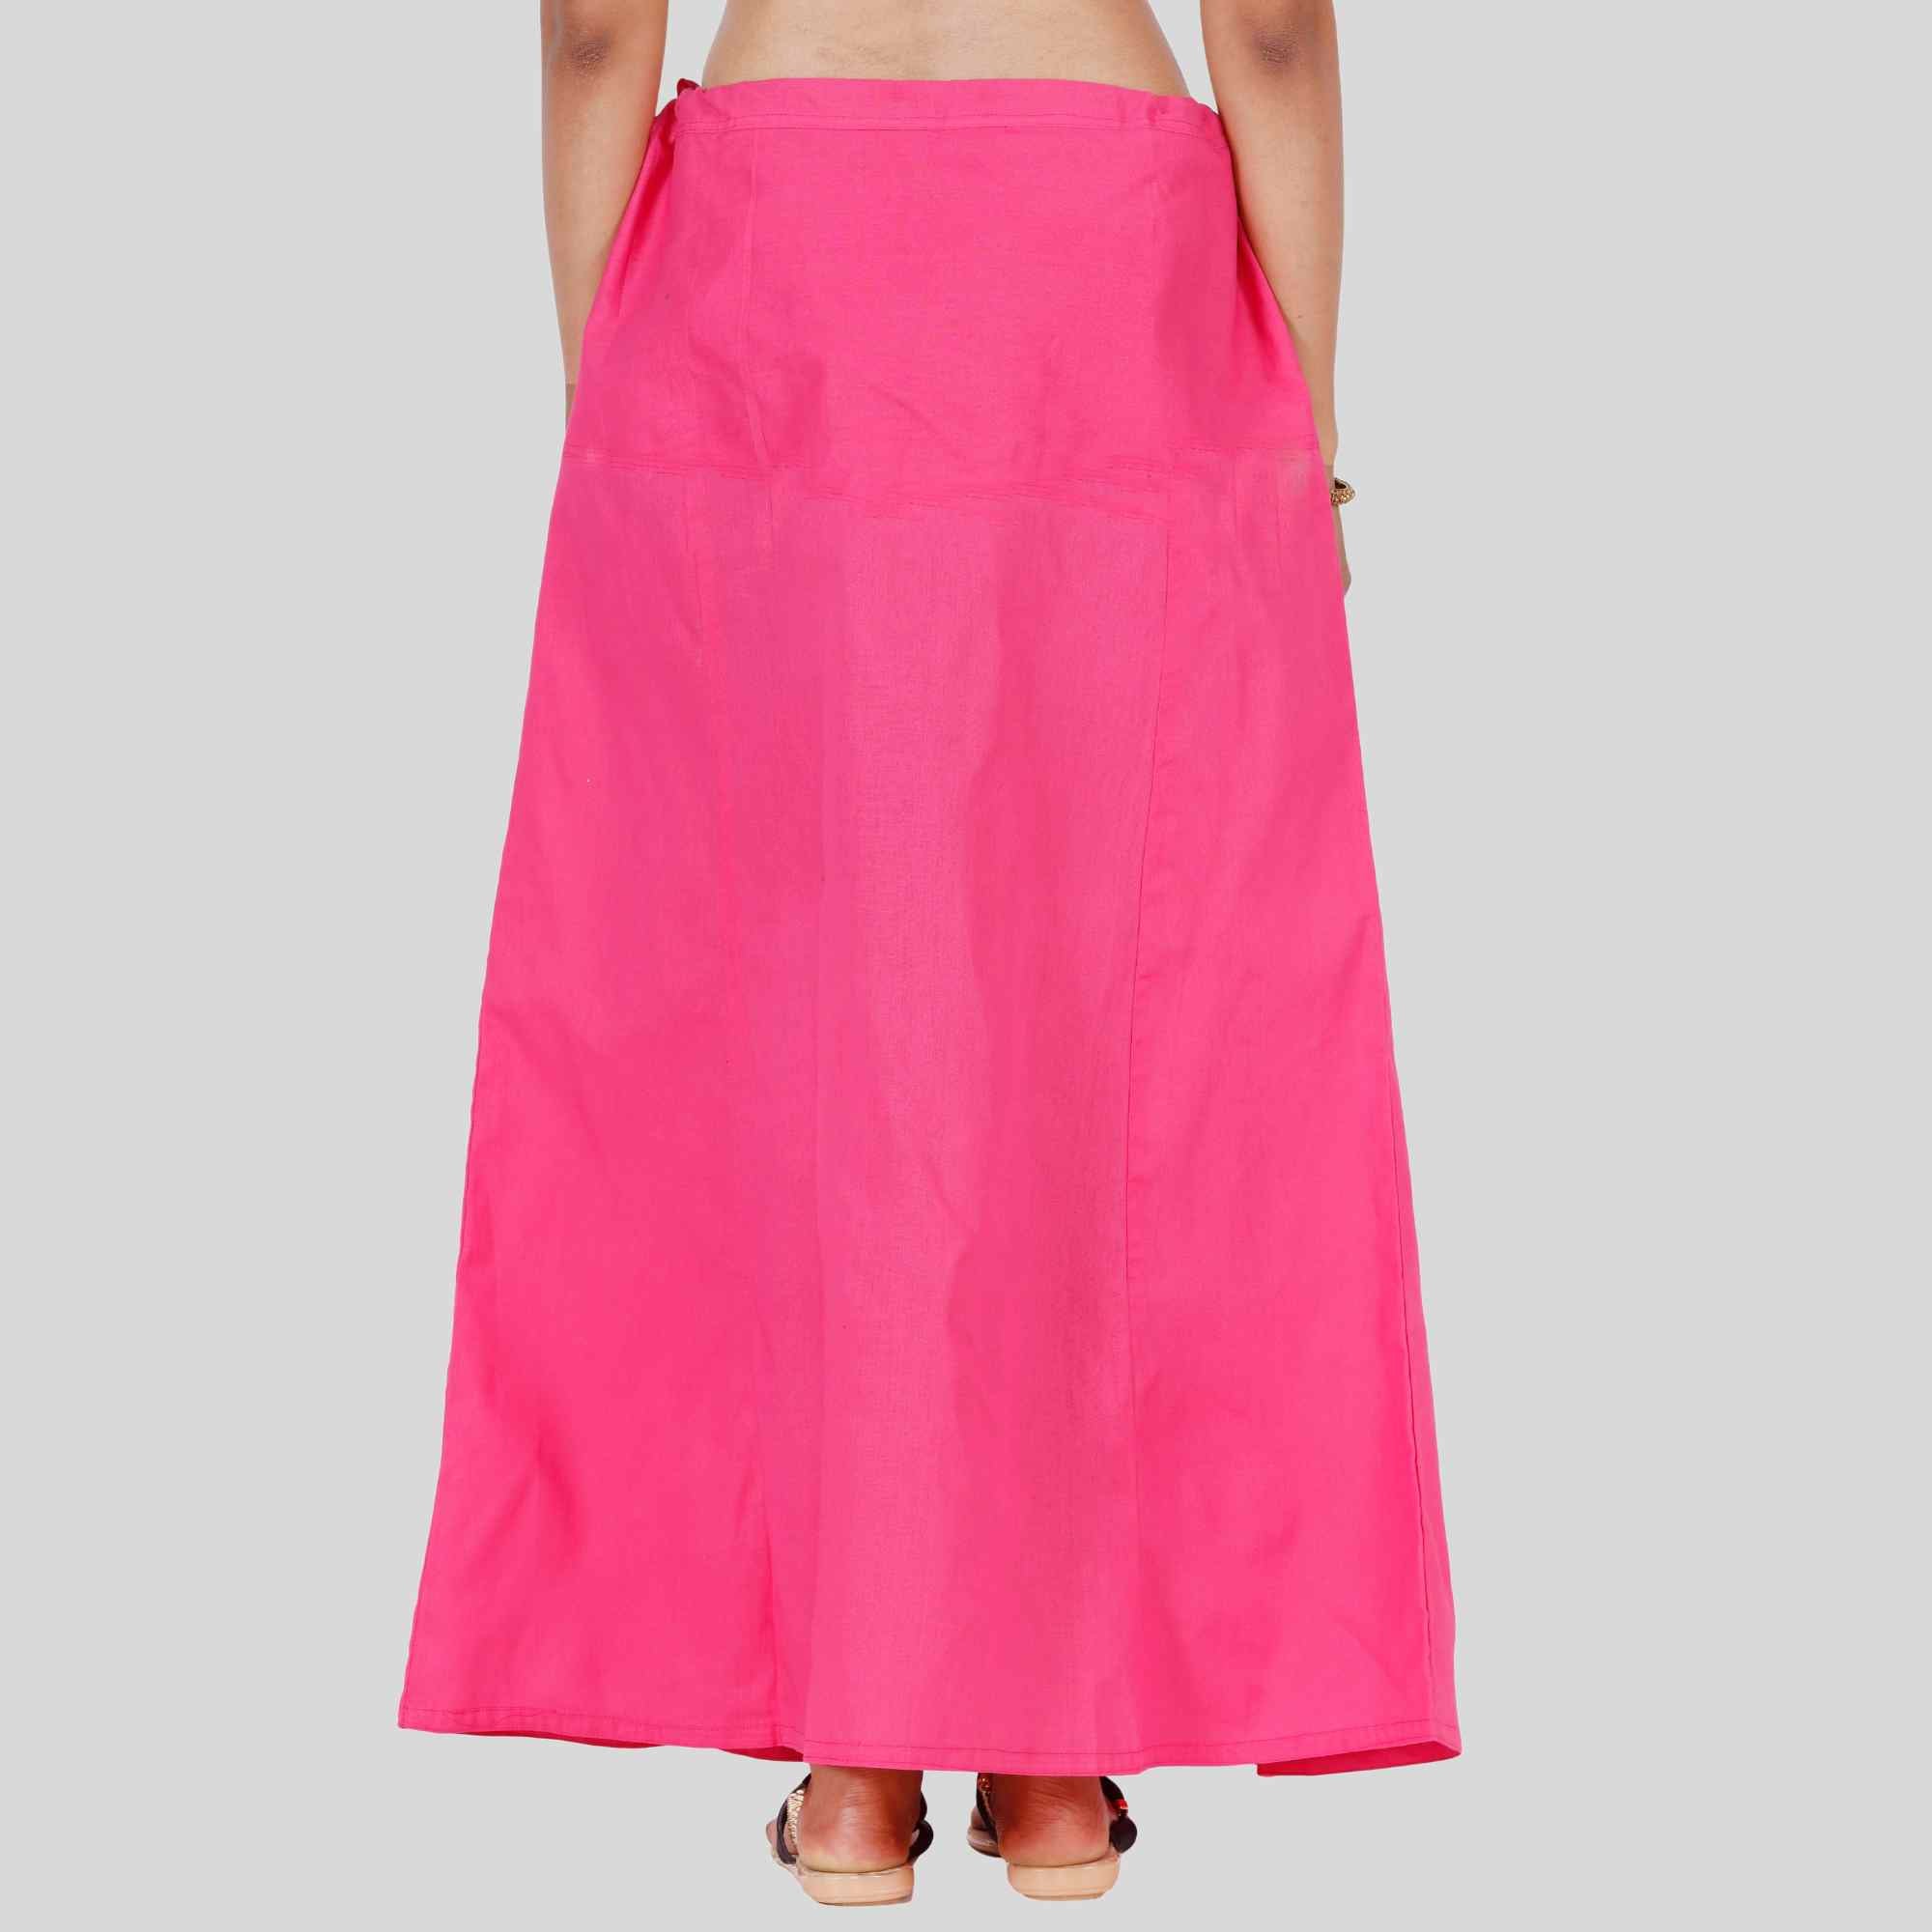 Cotton Petticoat in Pink color